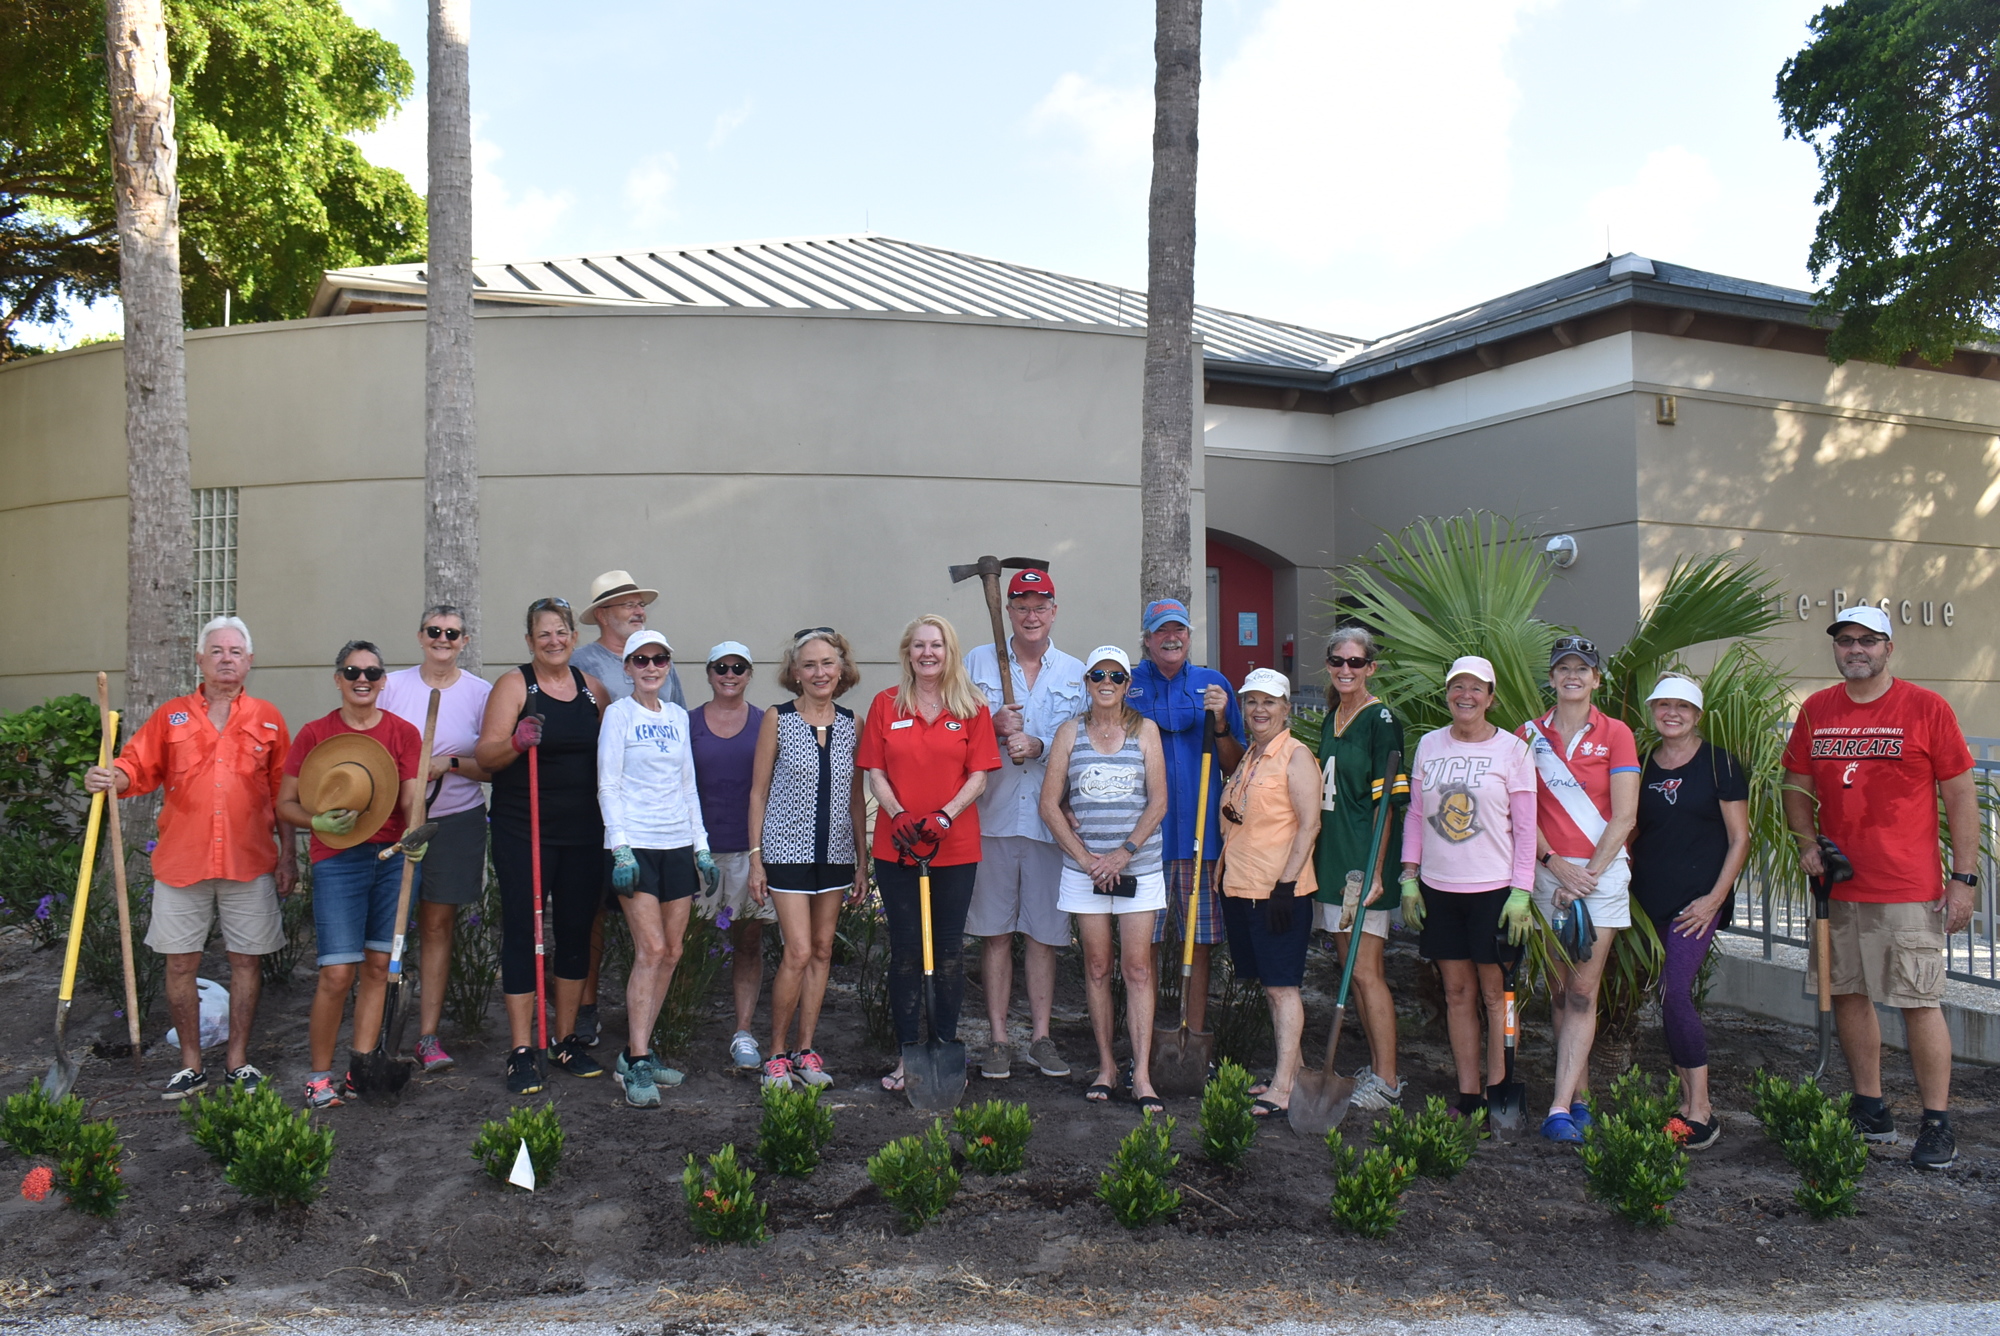 On July 31, 18 Longboat Key Garden Club volunteers showed up to get the plants in the ground at Fire Station 91.